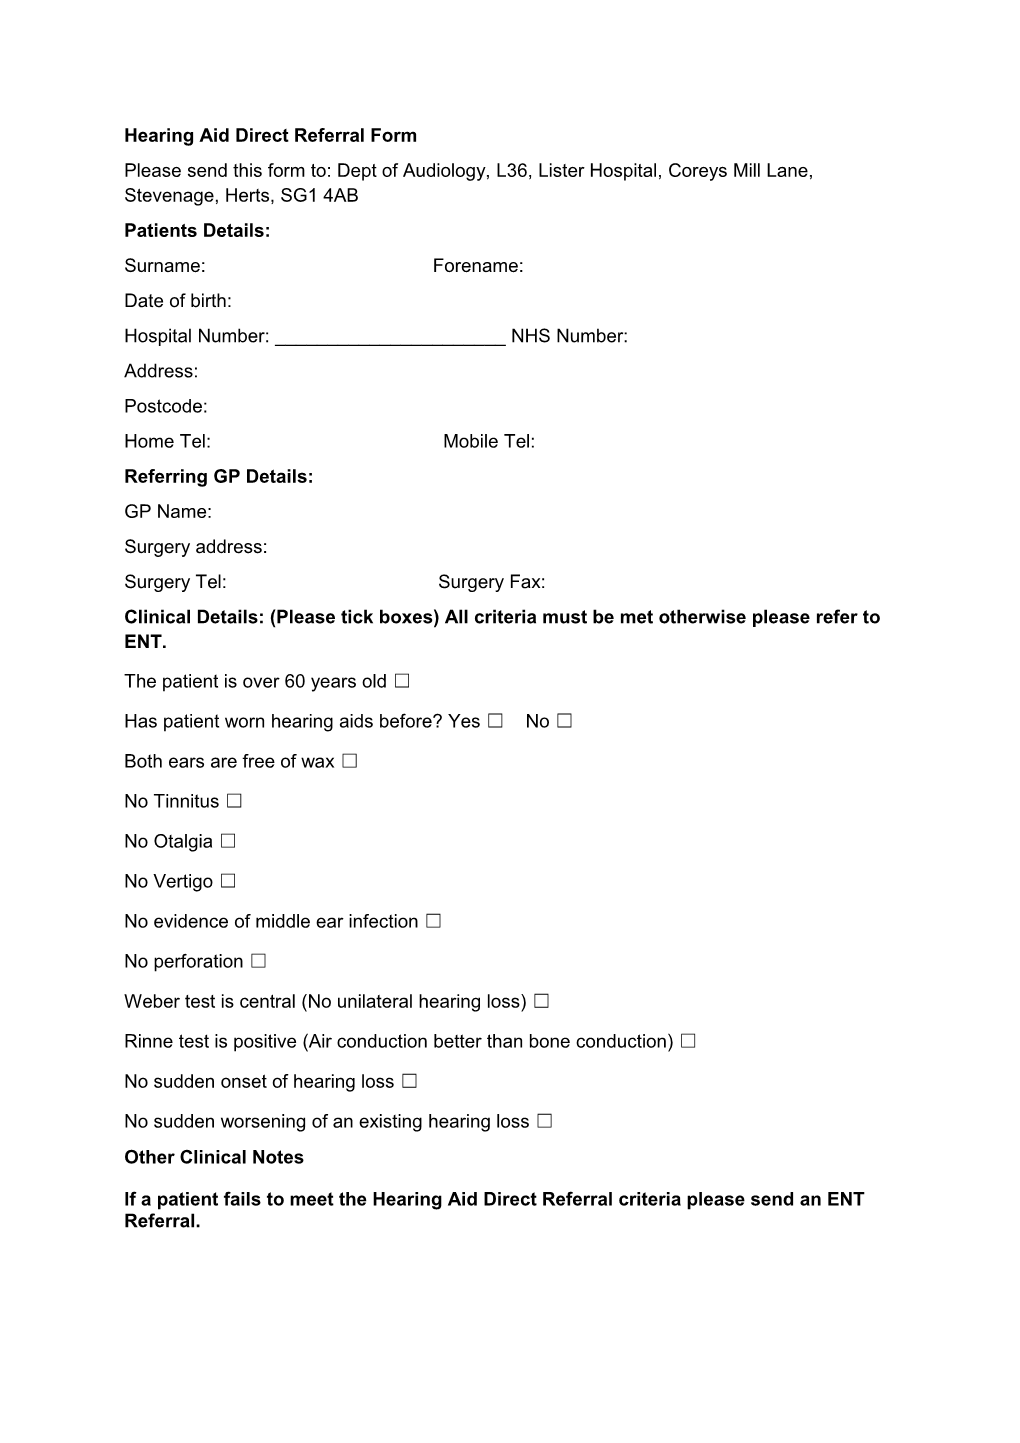 Hearing Aid Direct Referral Form